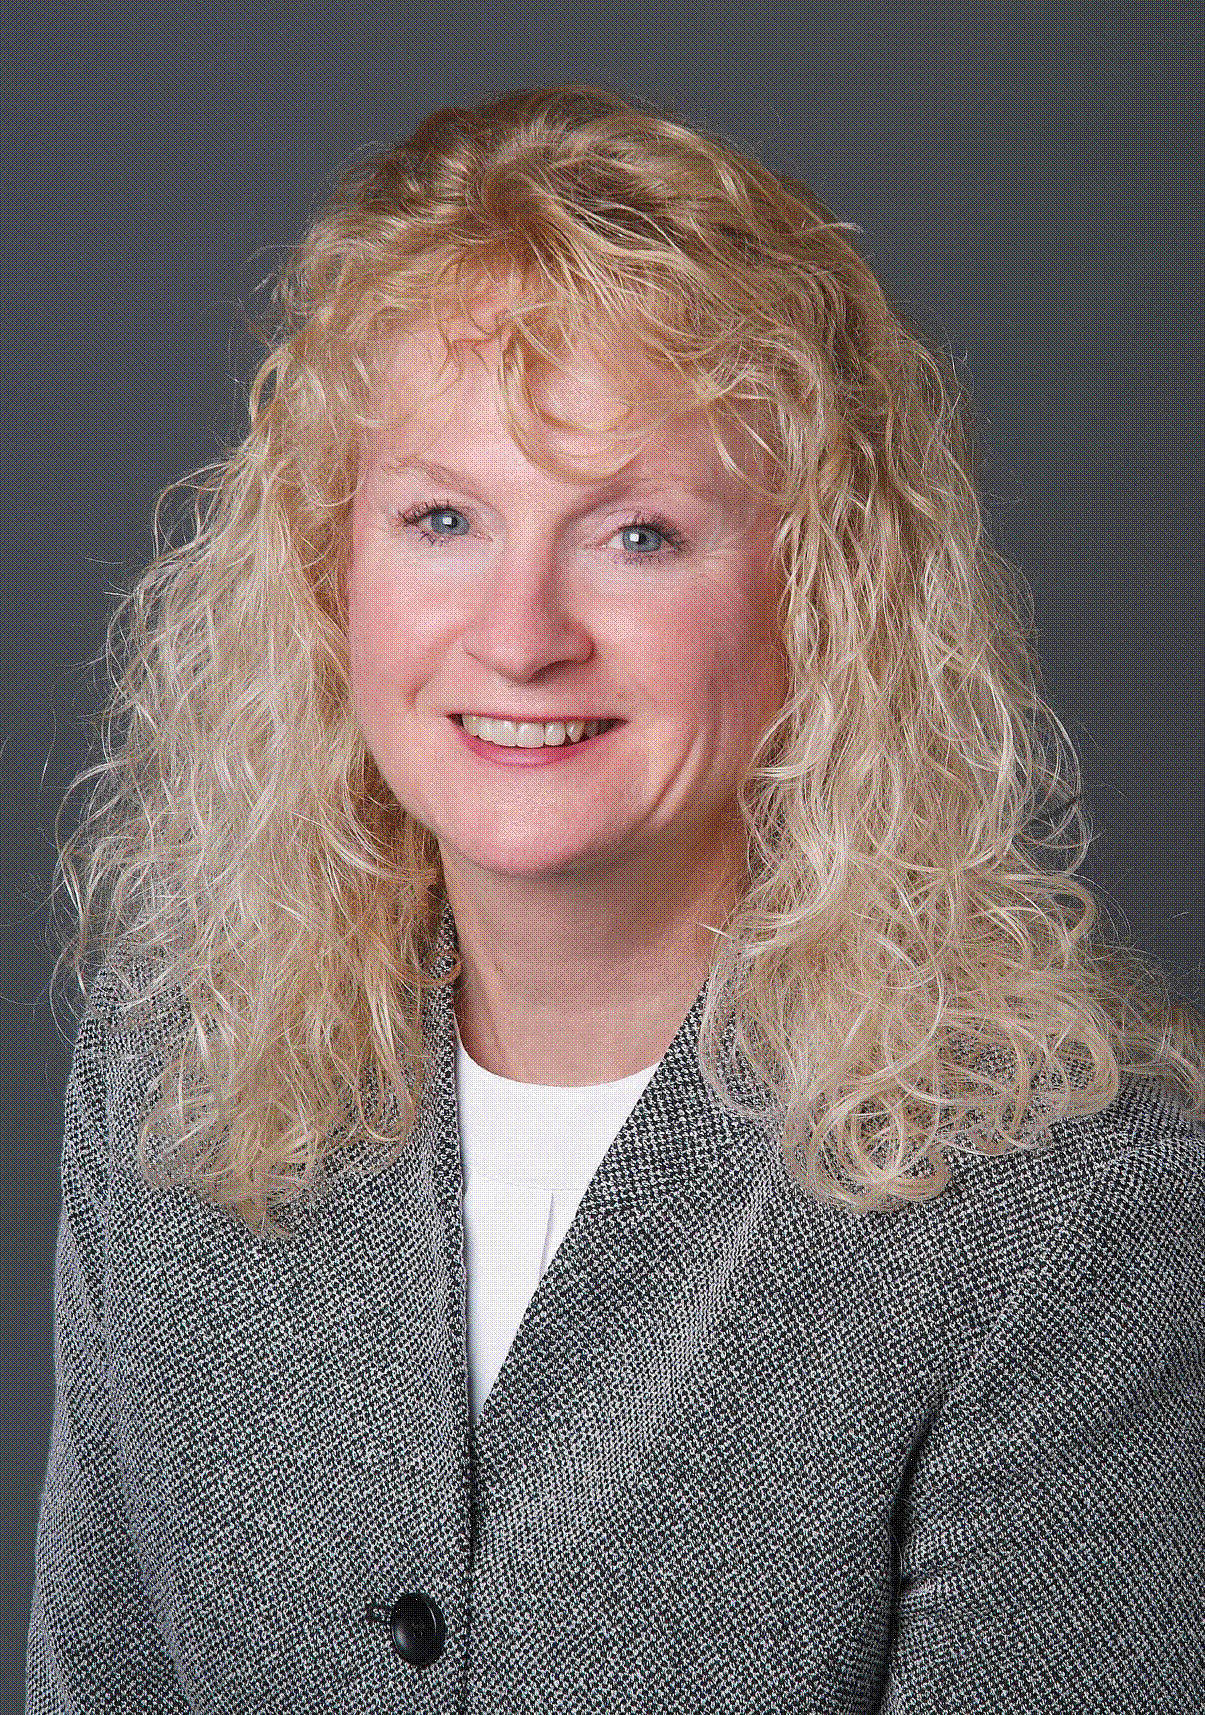 Karen Pauli is a research director in the insurance practice at TowerGroup, a research and advisory services firm.